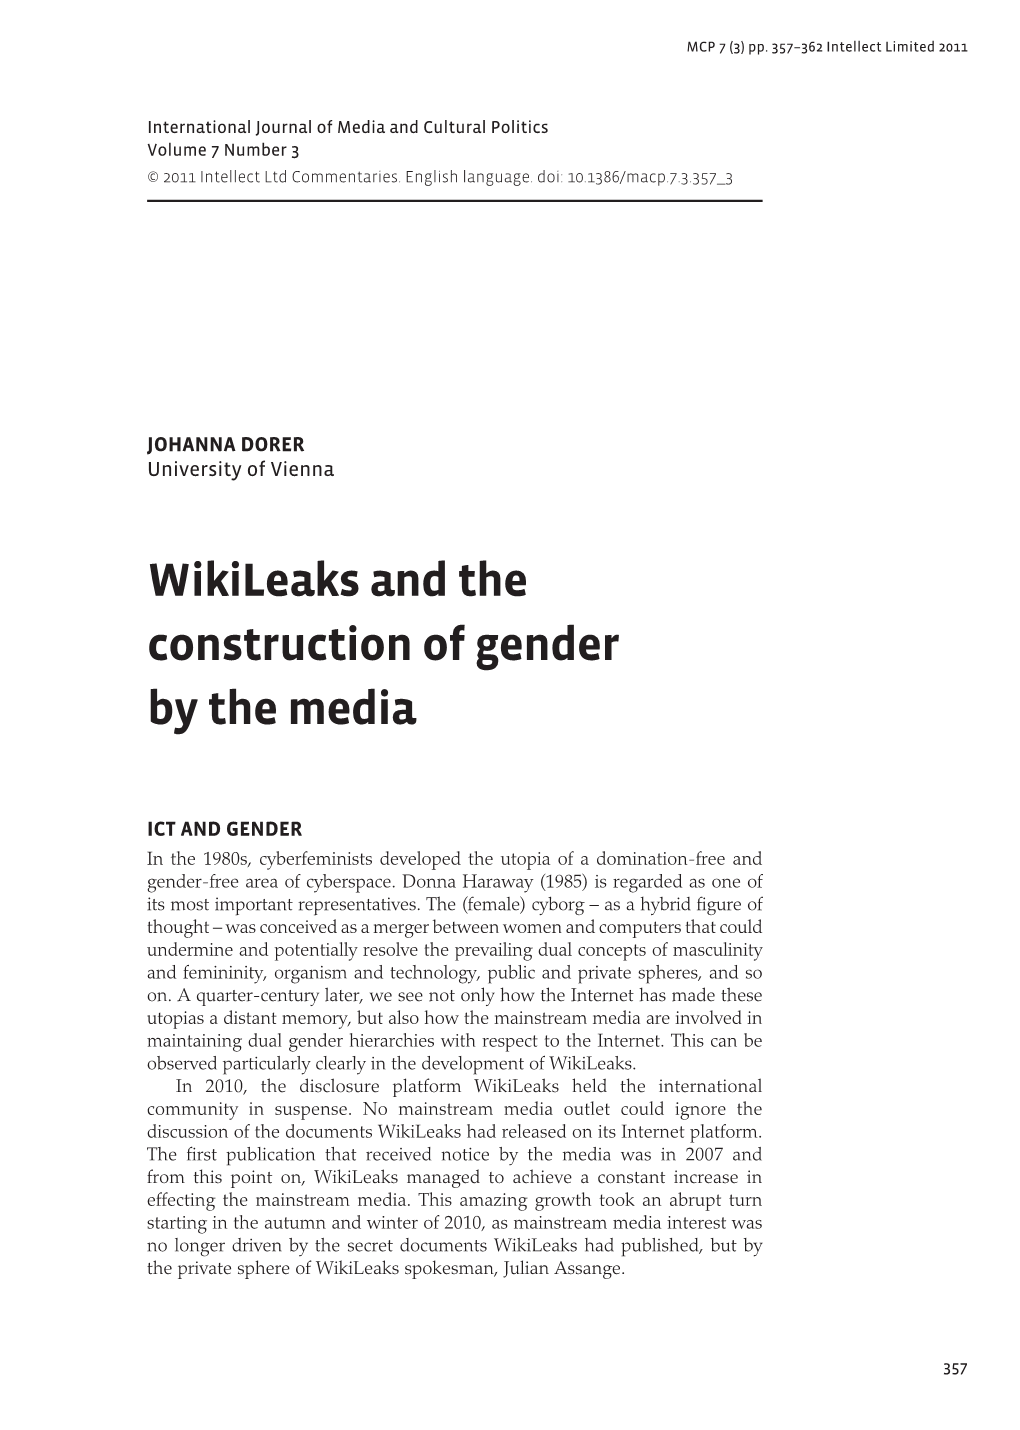 Wikileaks and the Construction of Gender by the Media